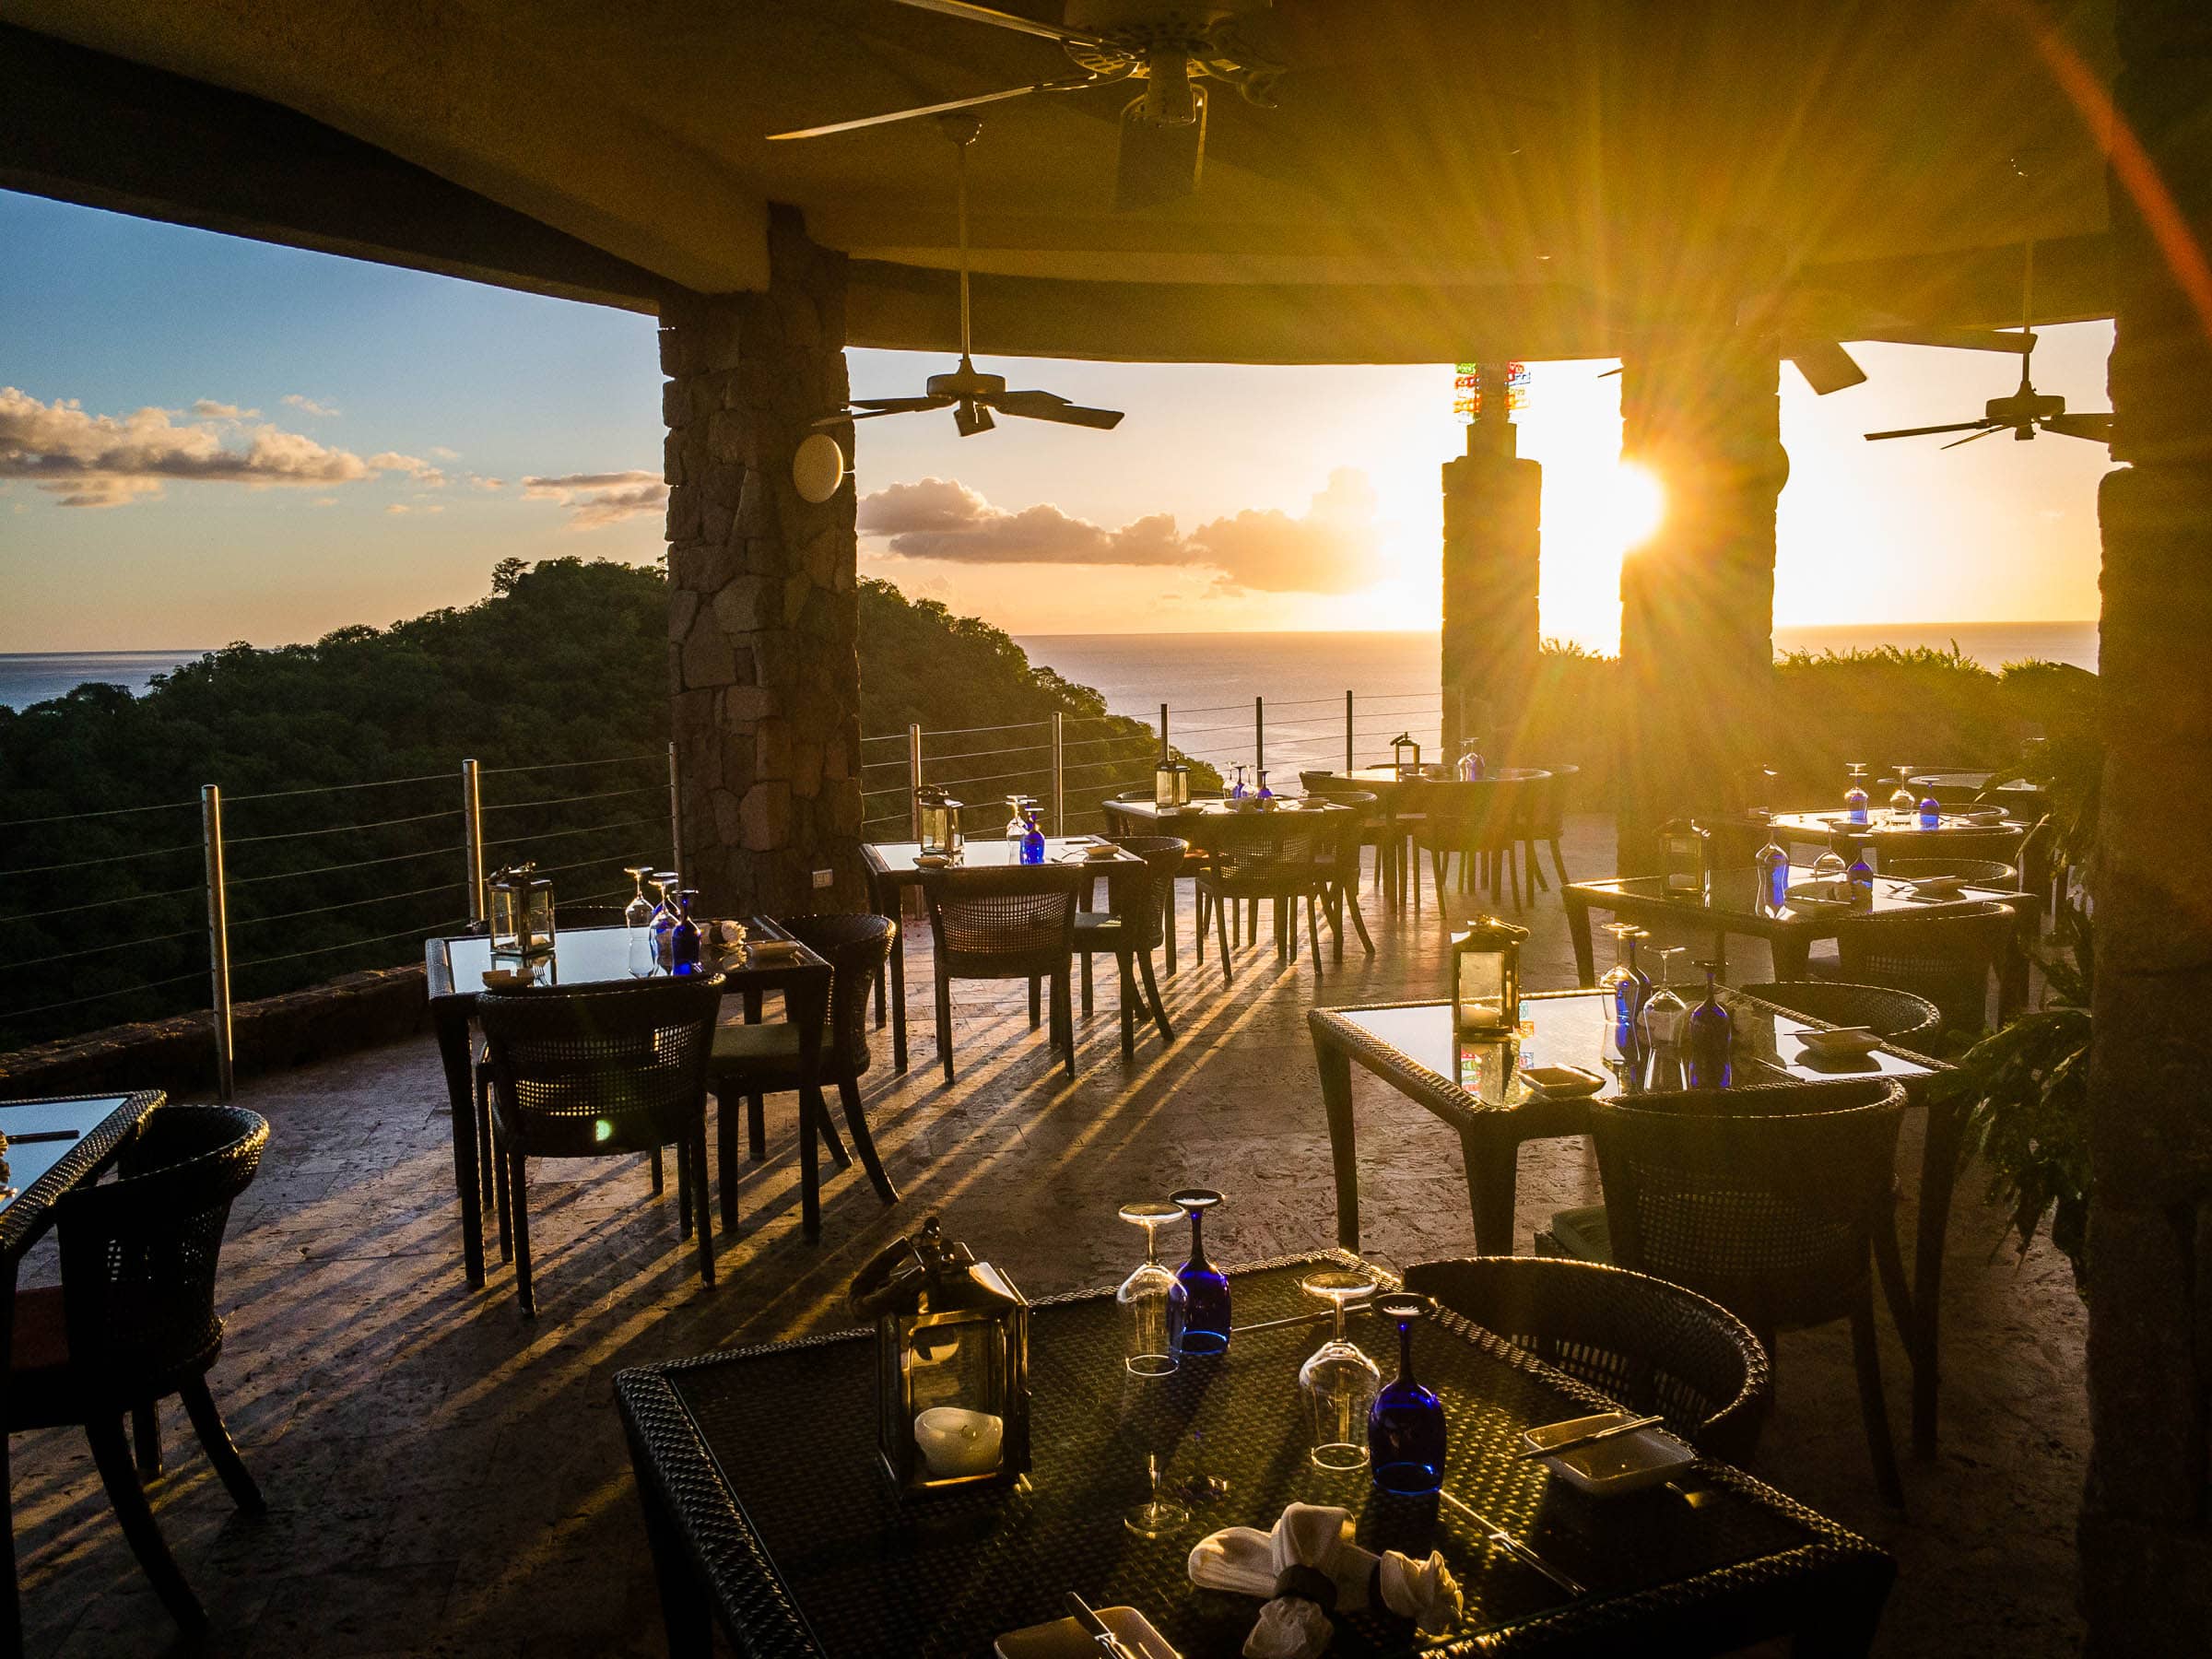 Sunsets stream through the dining area.